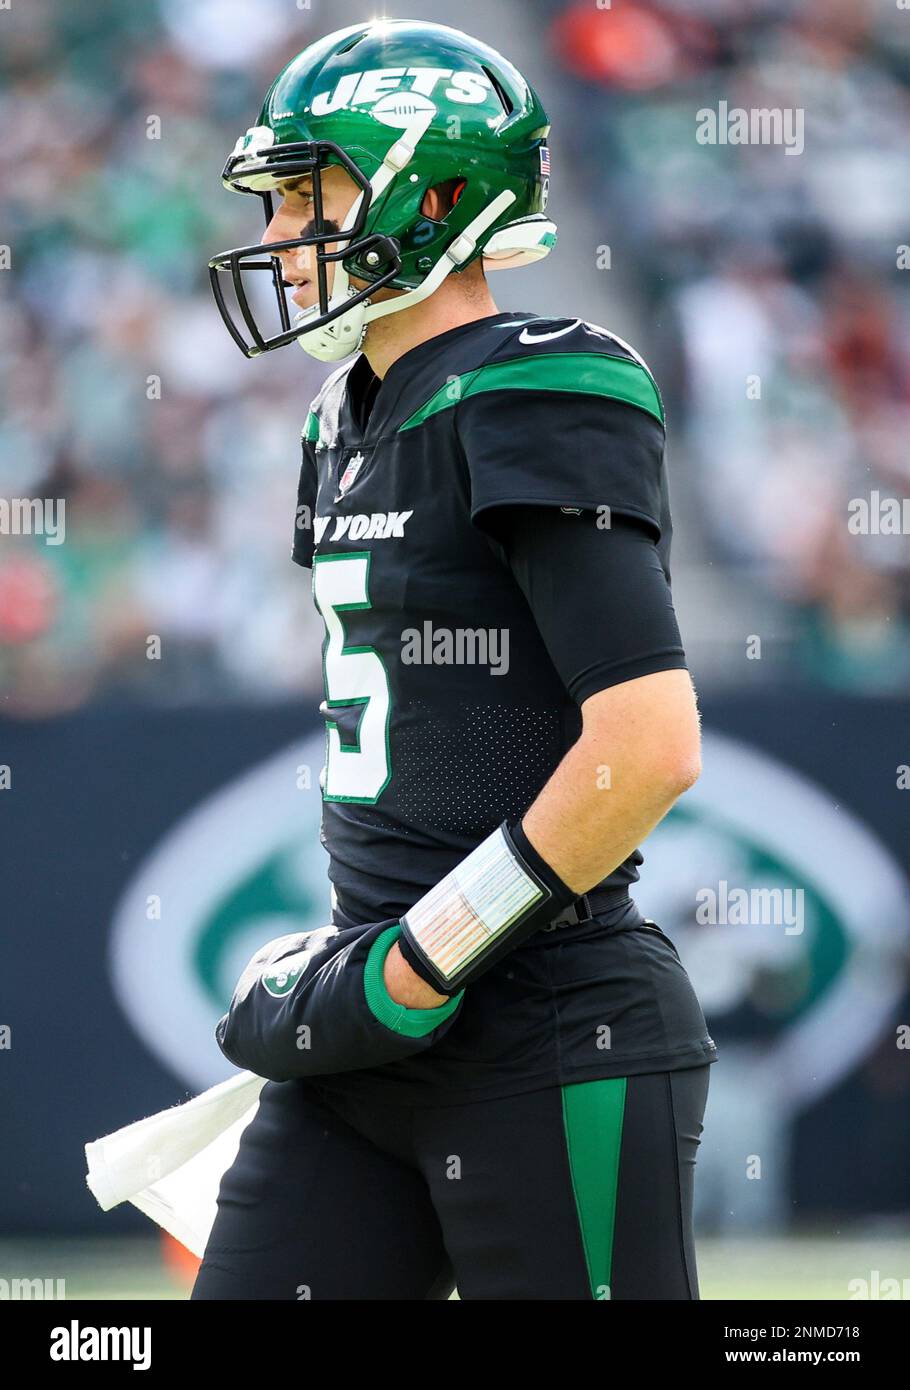 EAST RUTHERFORD, NJ - OCTOBER 31: New York Jets Quarterback Mike White (5)  is pictured during the National Football League game between the Cincinnati  Bengals and the New York Jets on October